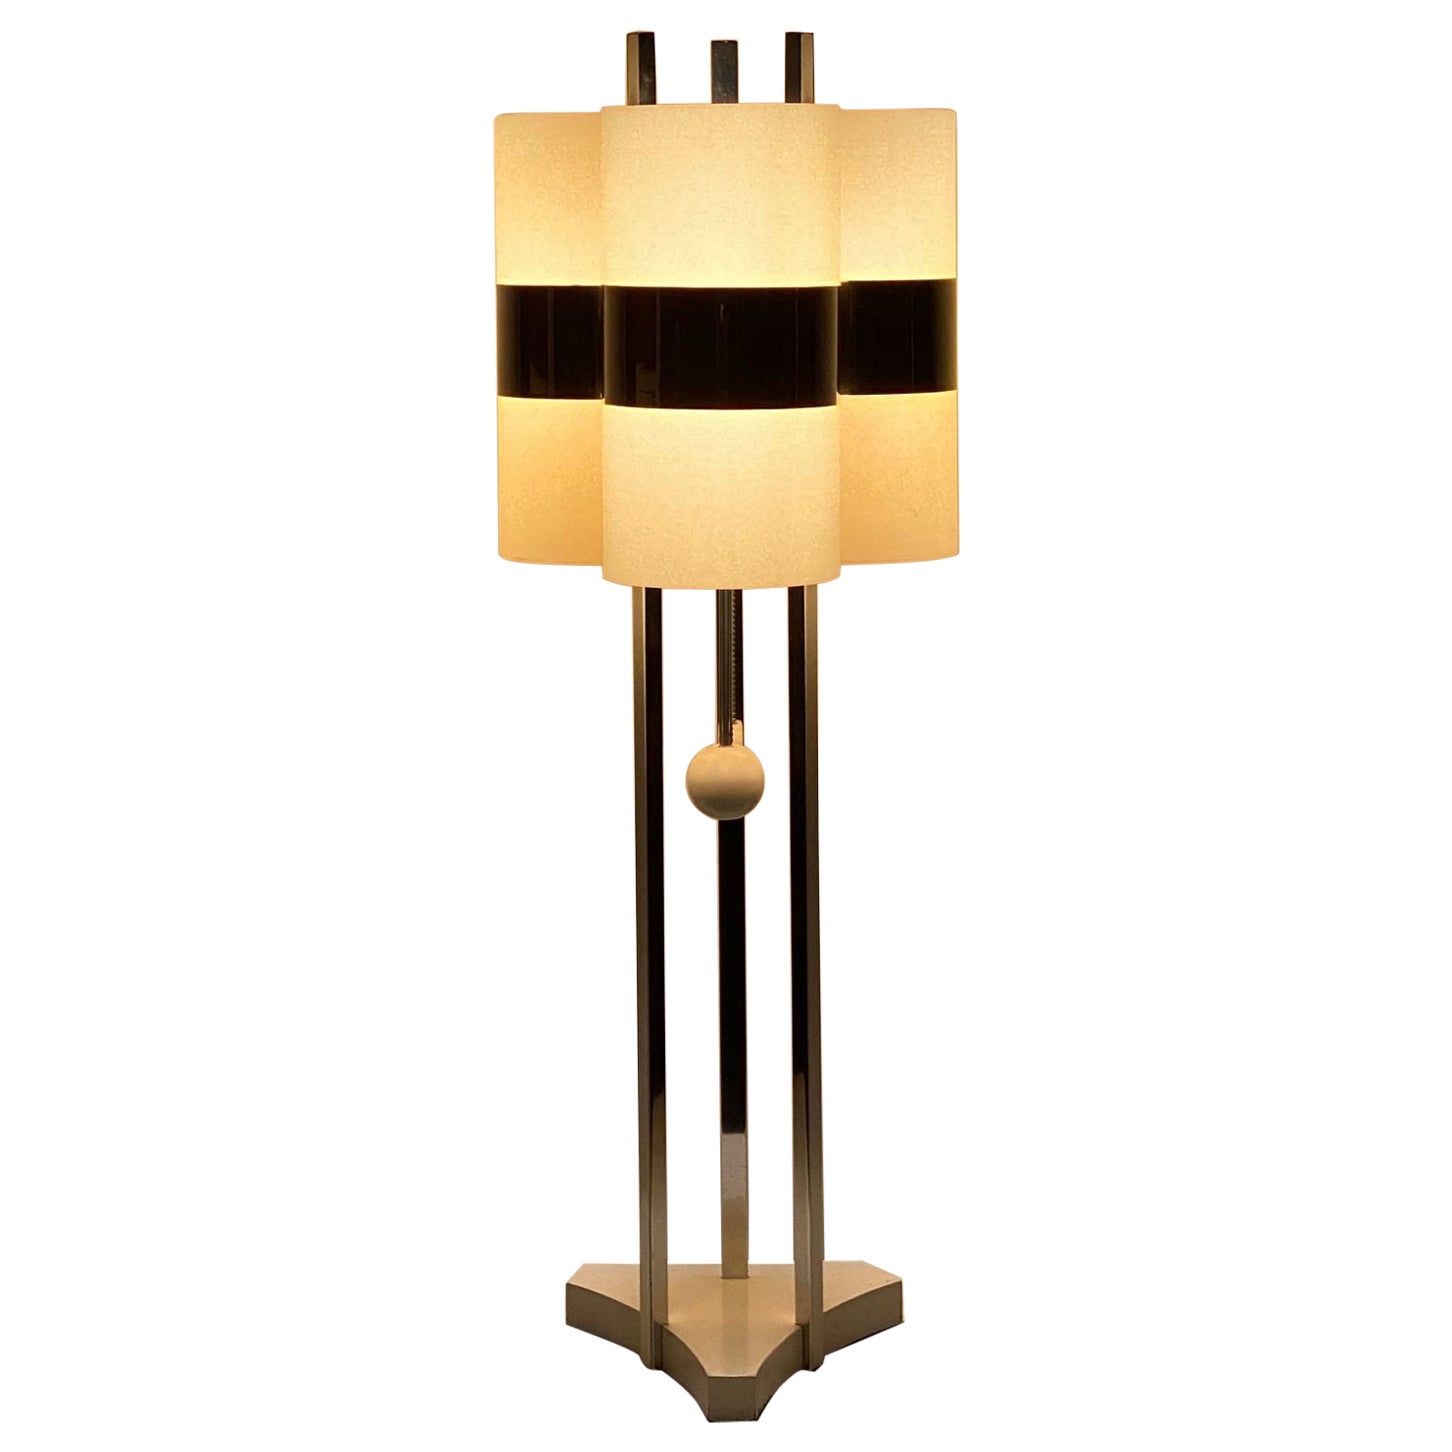 Space Age Rare Table Lamp in Chrome and Acrylic by Modeline, circa 1970s For Sale